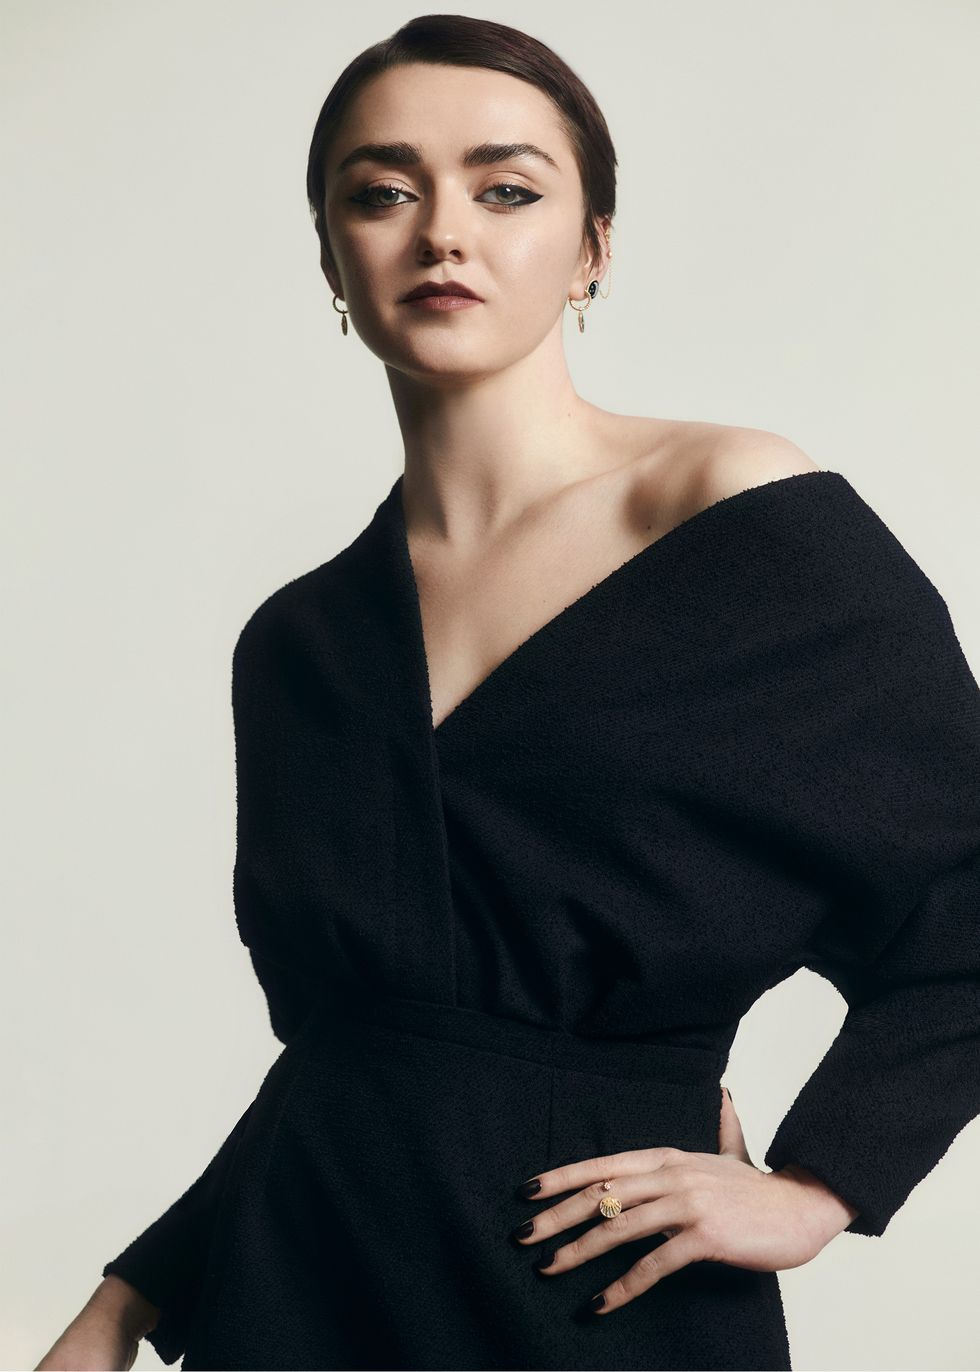 The New Look: Maisie Williams interview - on fashion, ﻿family and love